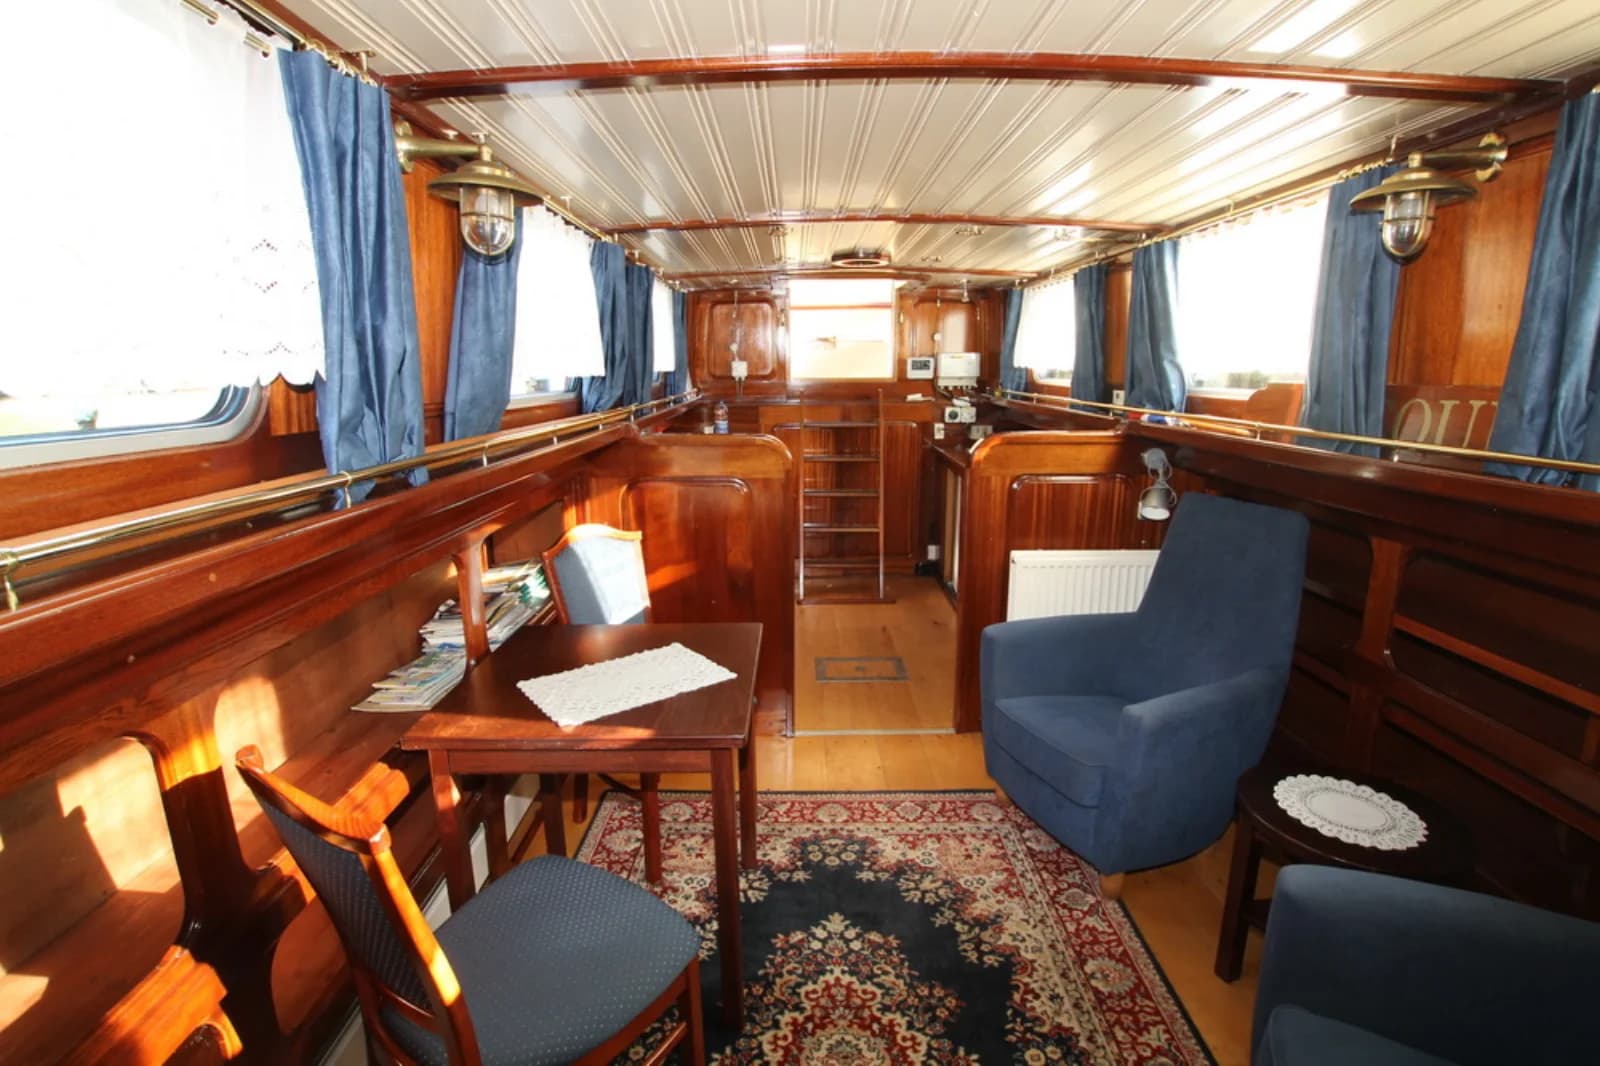 Meeting room in Magnificent barge - 0